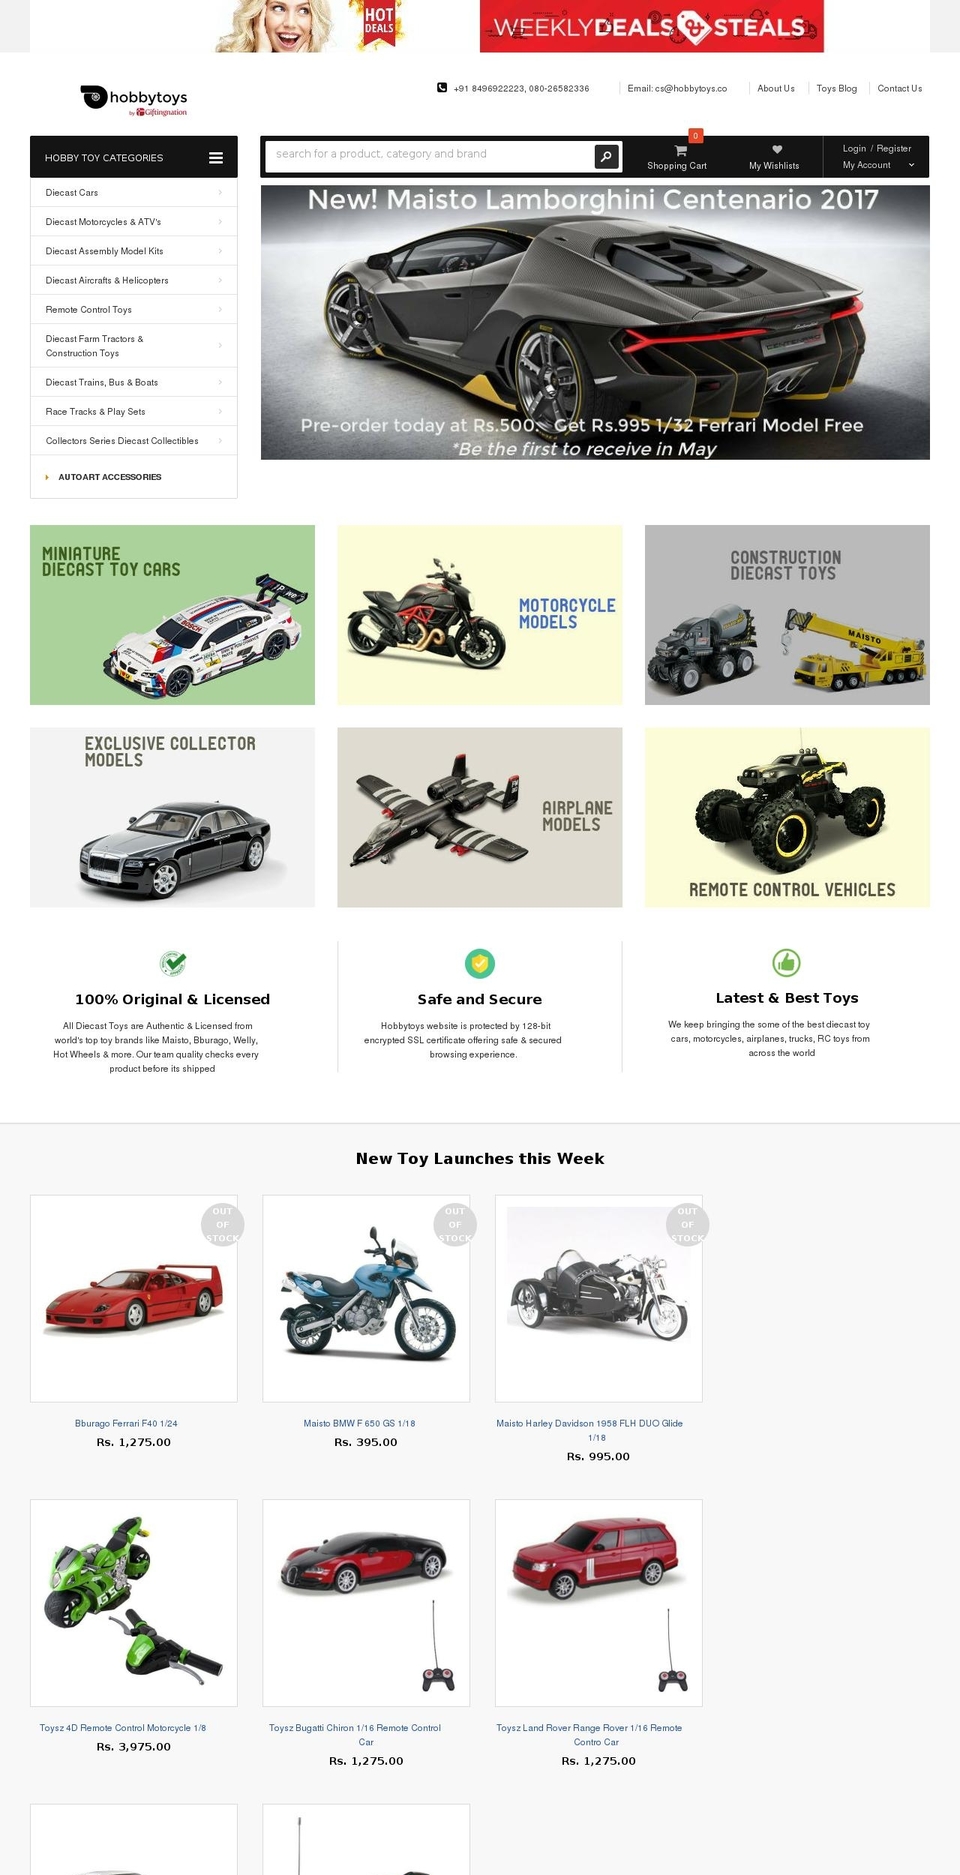 Simple Shopify theme site example hobbytoys.co